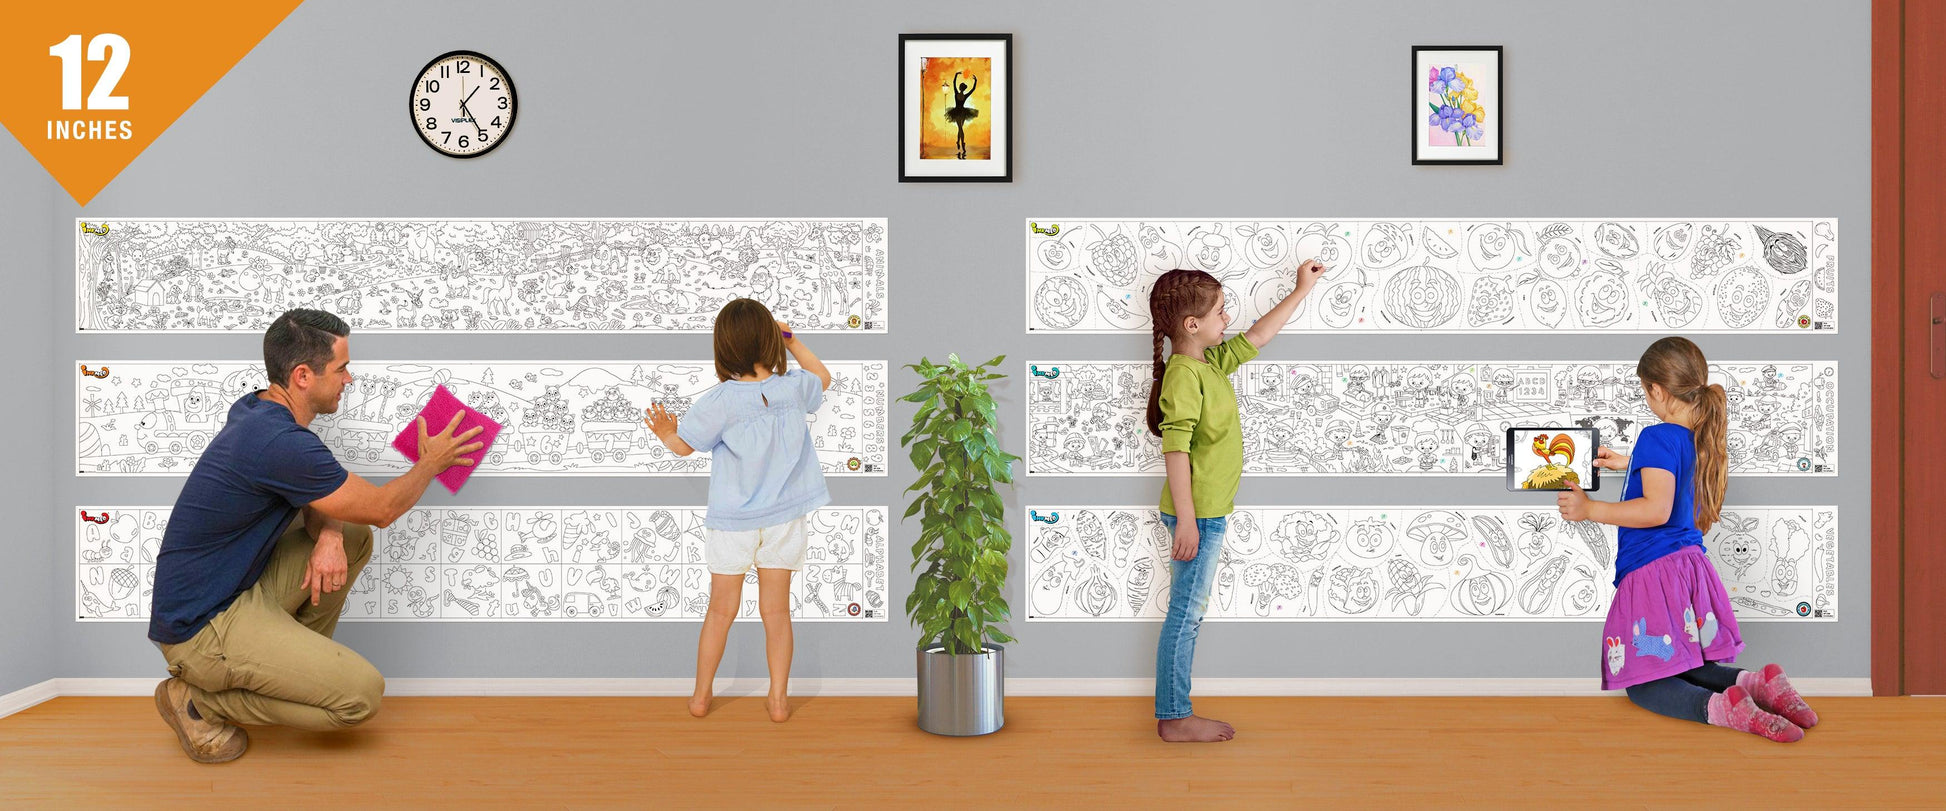 The image shows a father with playing with his three daughters with the 12 inches size of 6 rolls sticked on the wall and spending quality time